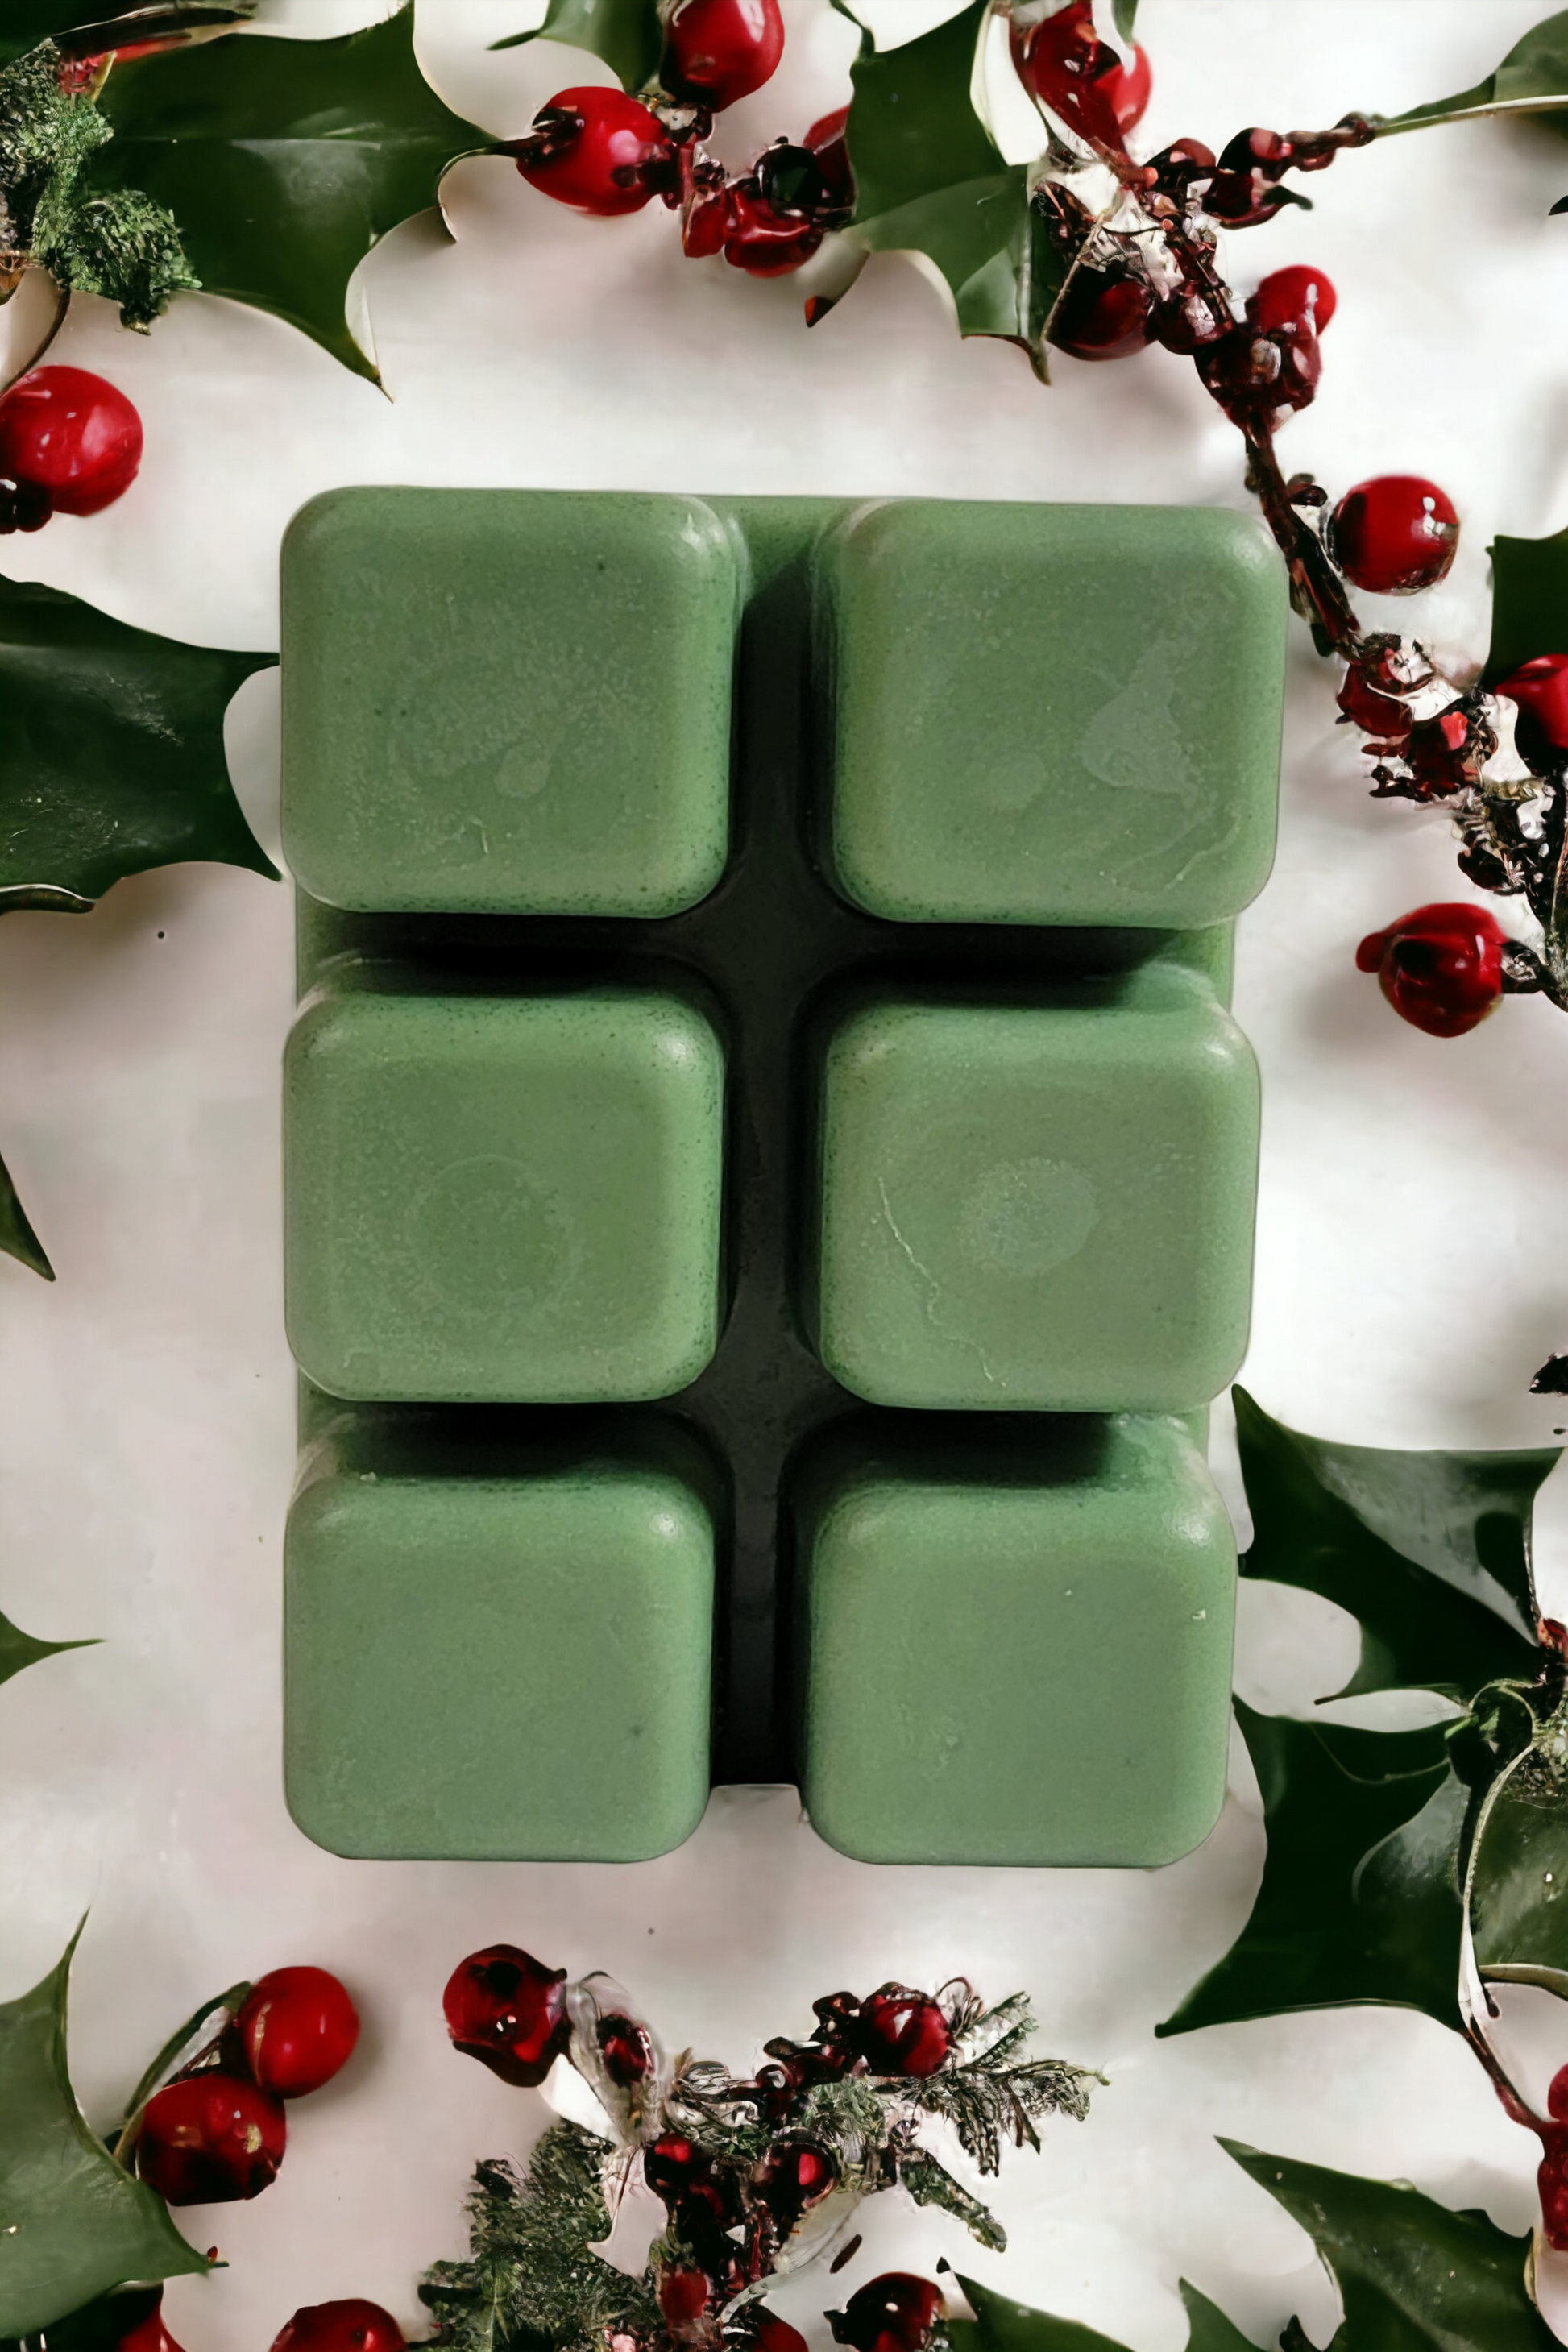 Frosted Fir - Christmas tree - Long Lasting Wax Melts - Non-Toxic